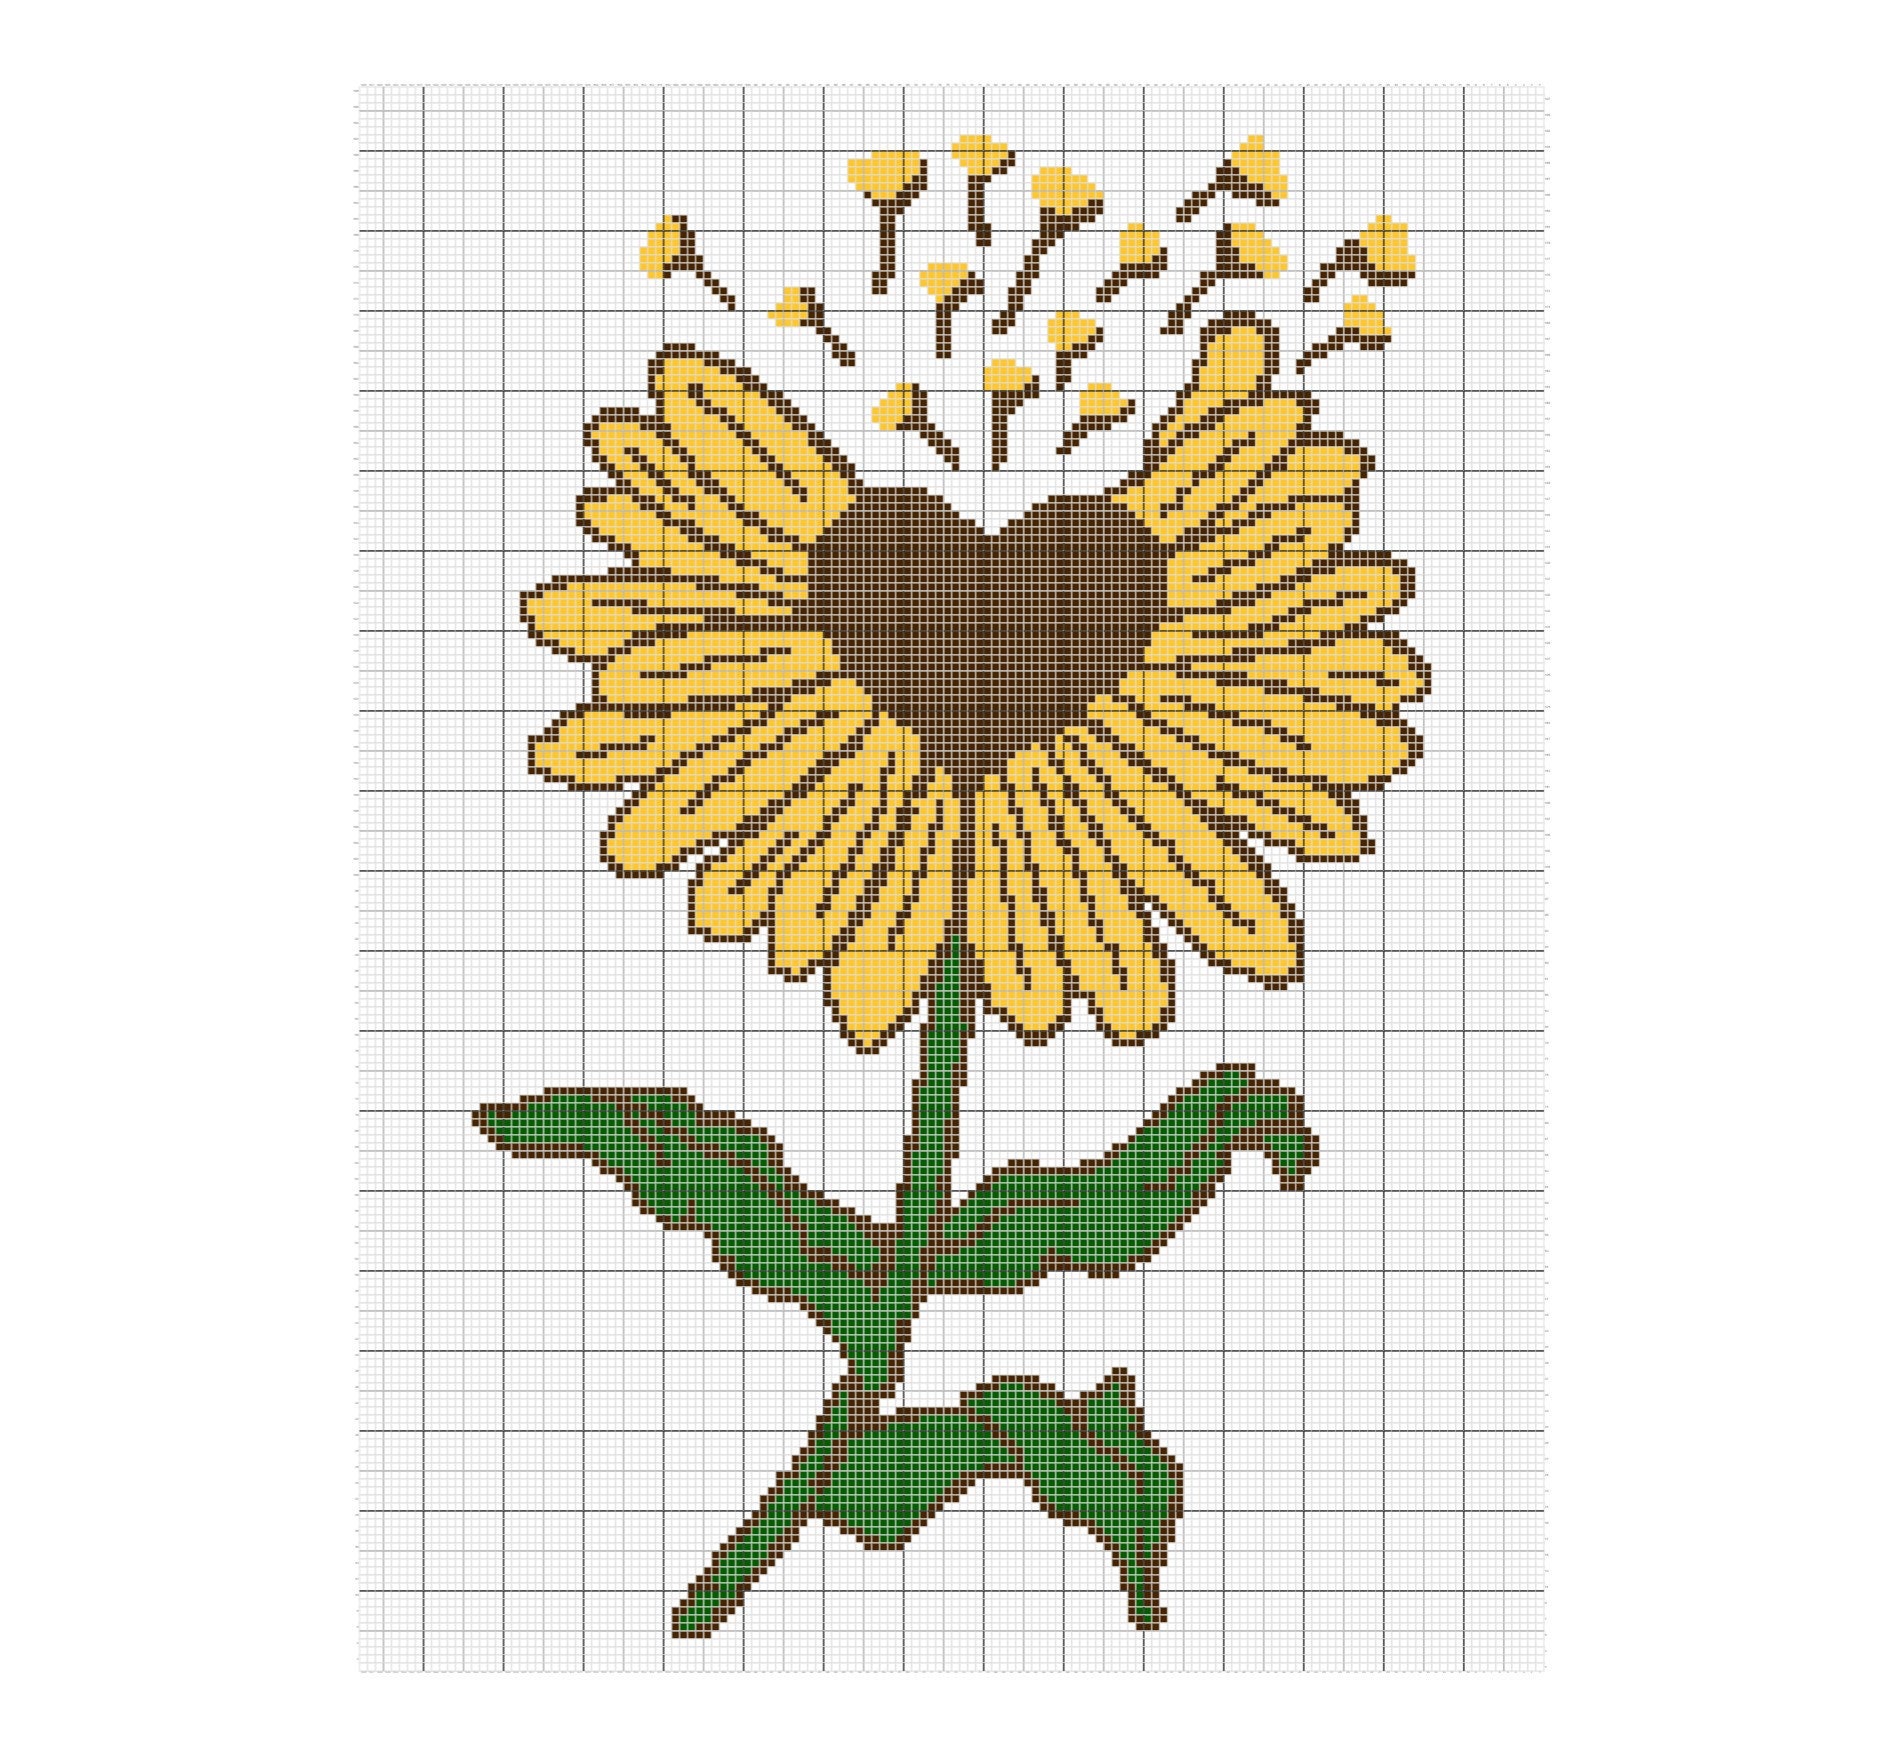 Sunflower Blank Journal Paper Vintage Lined Writing Paper 